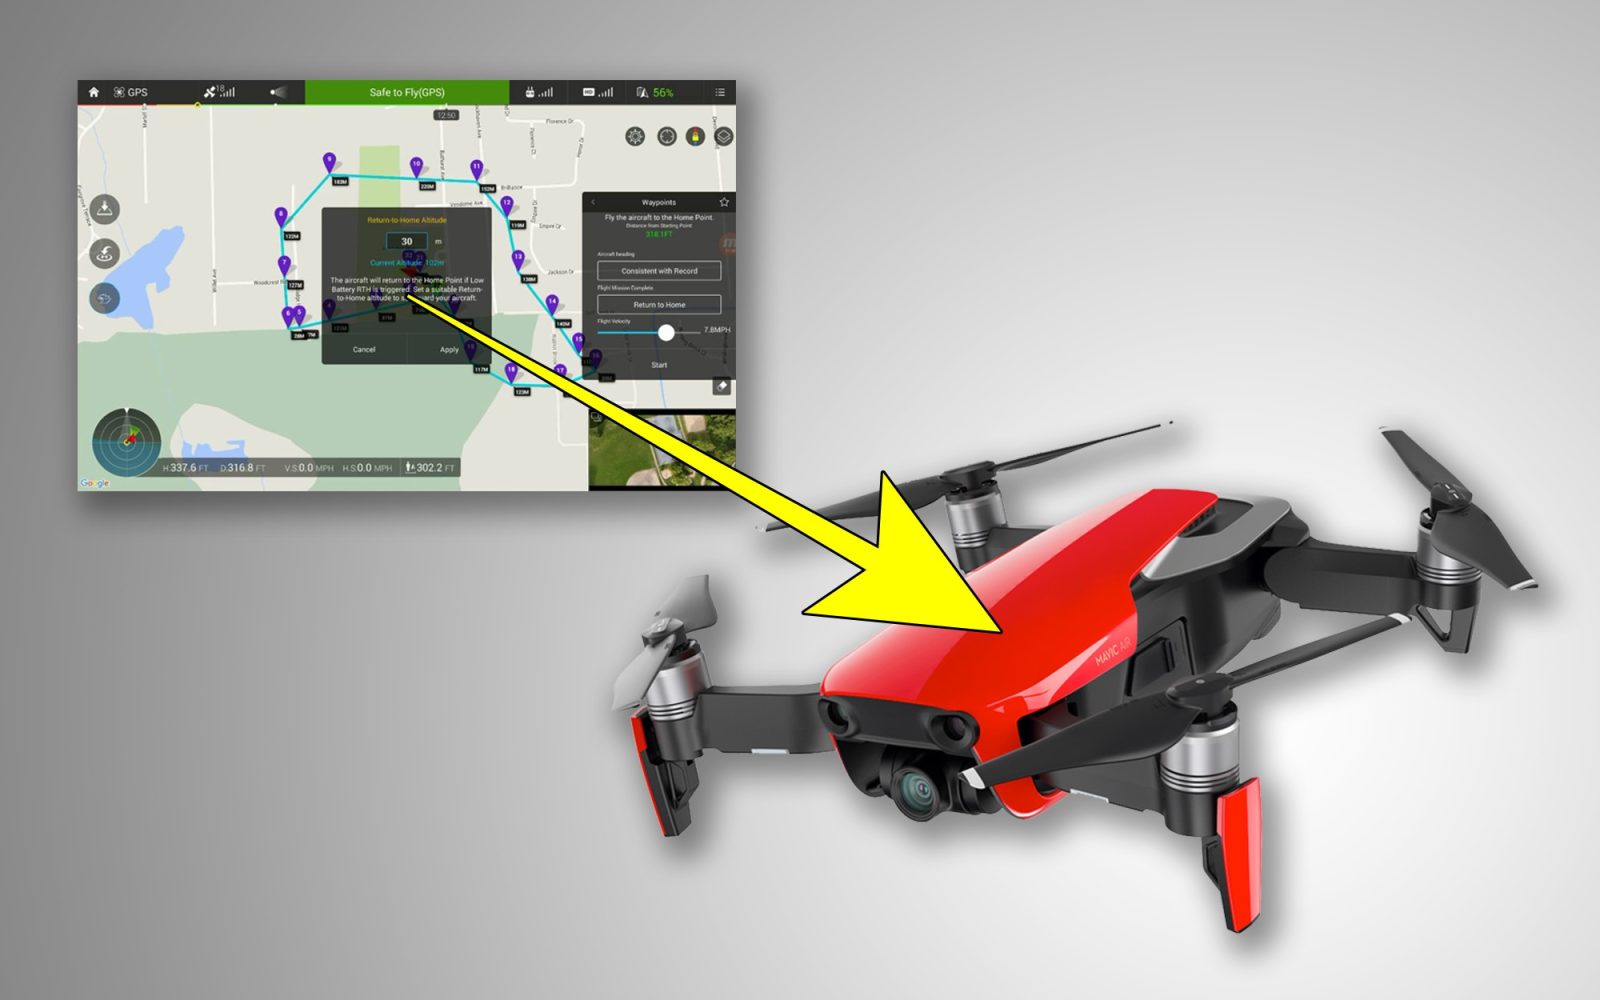 Vote on DroneDJ to get Waypoints back on the DJI Mavic Air - DJI is listening